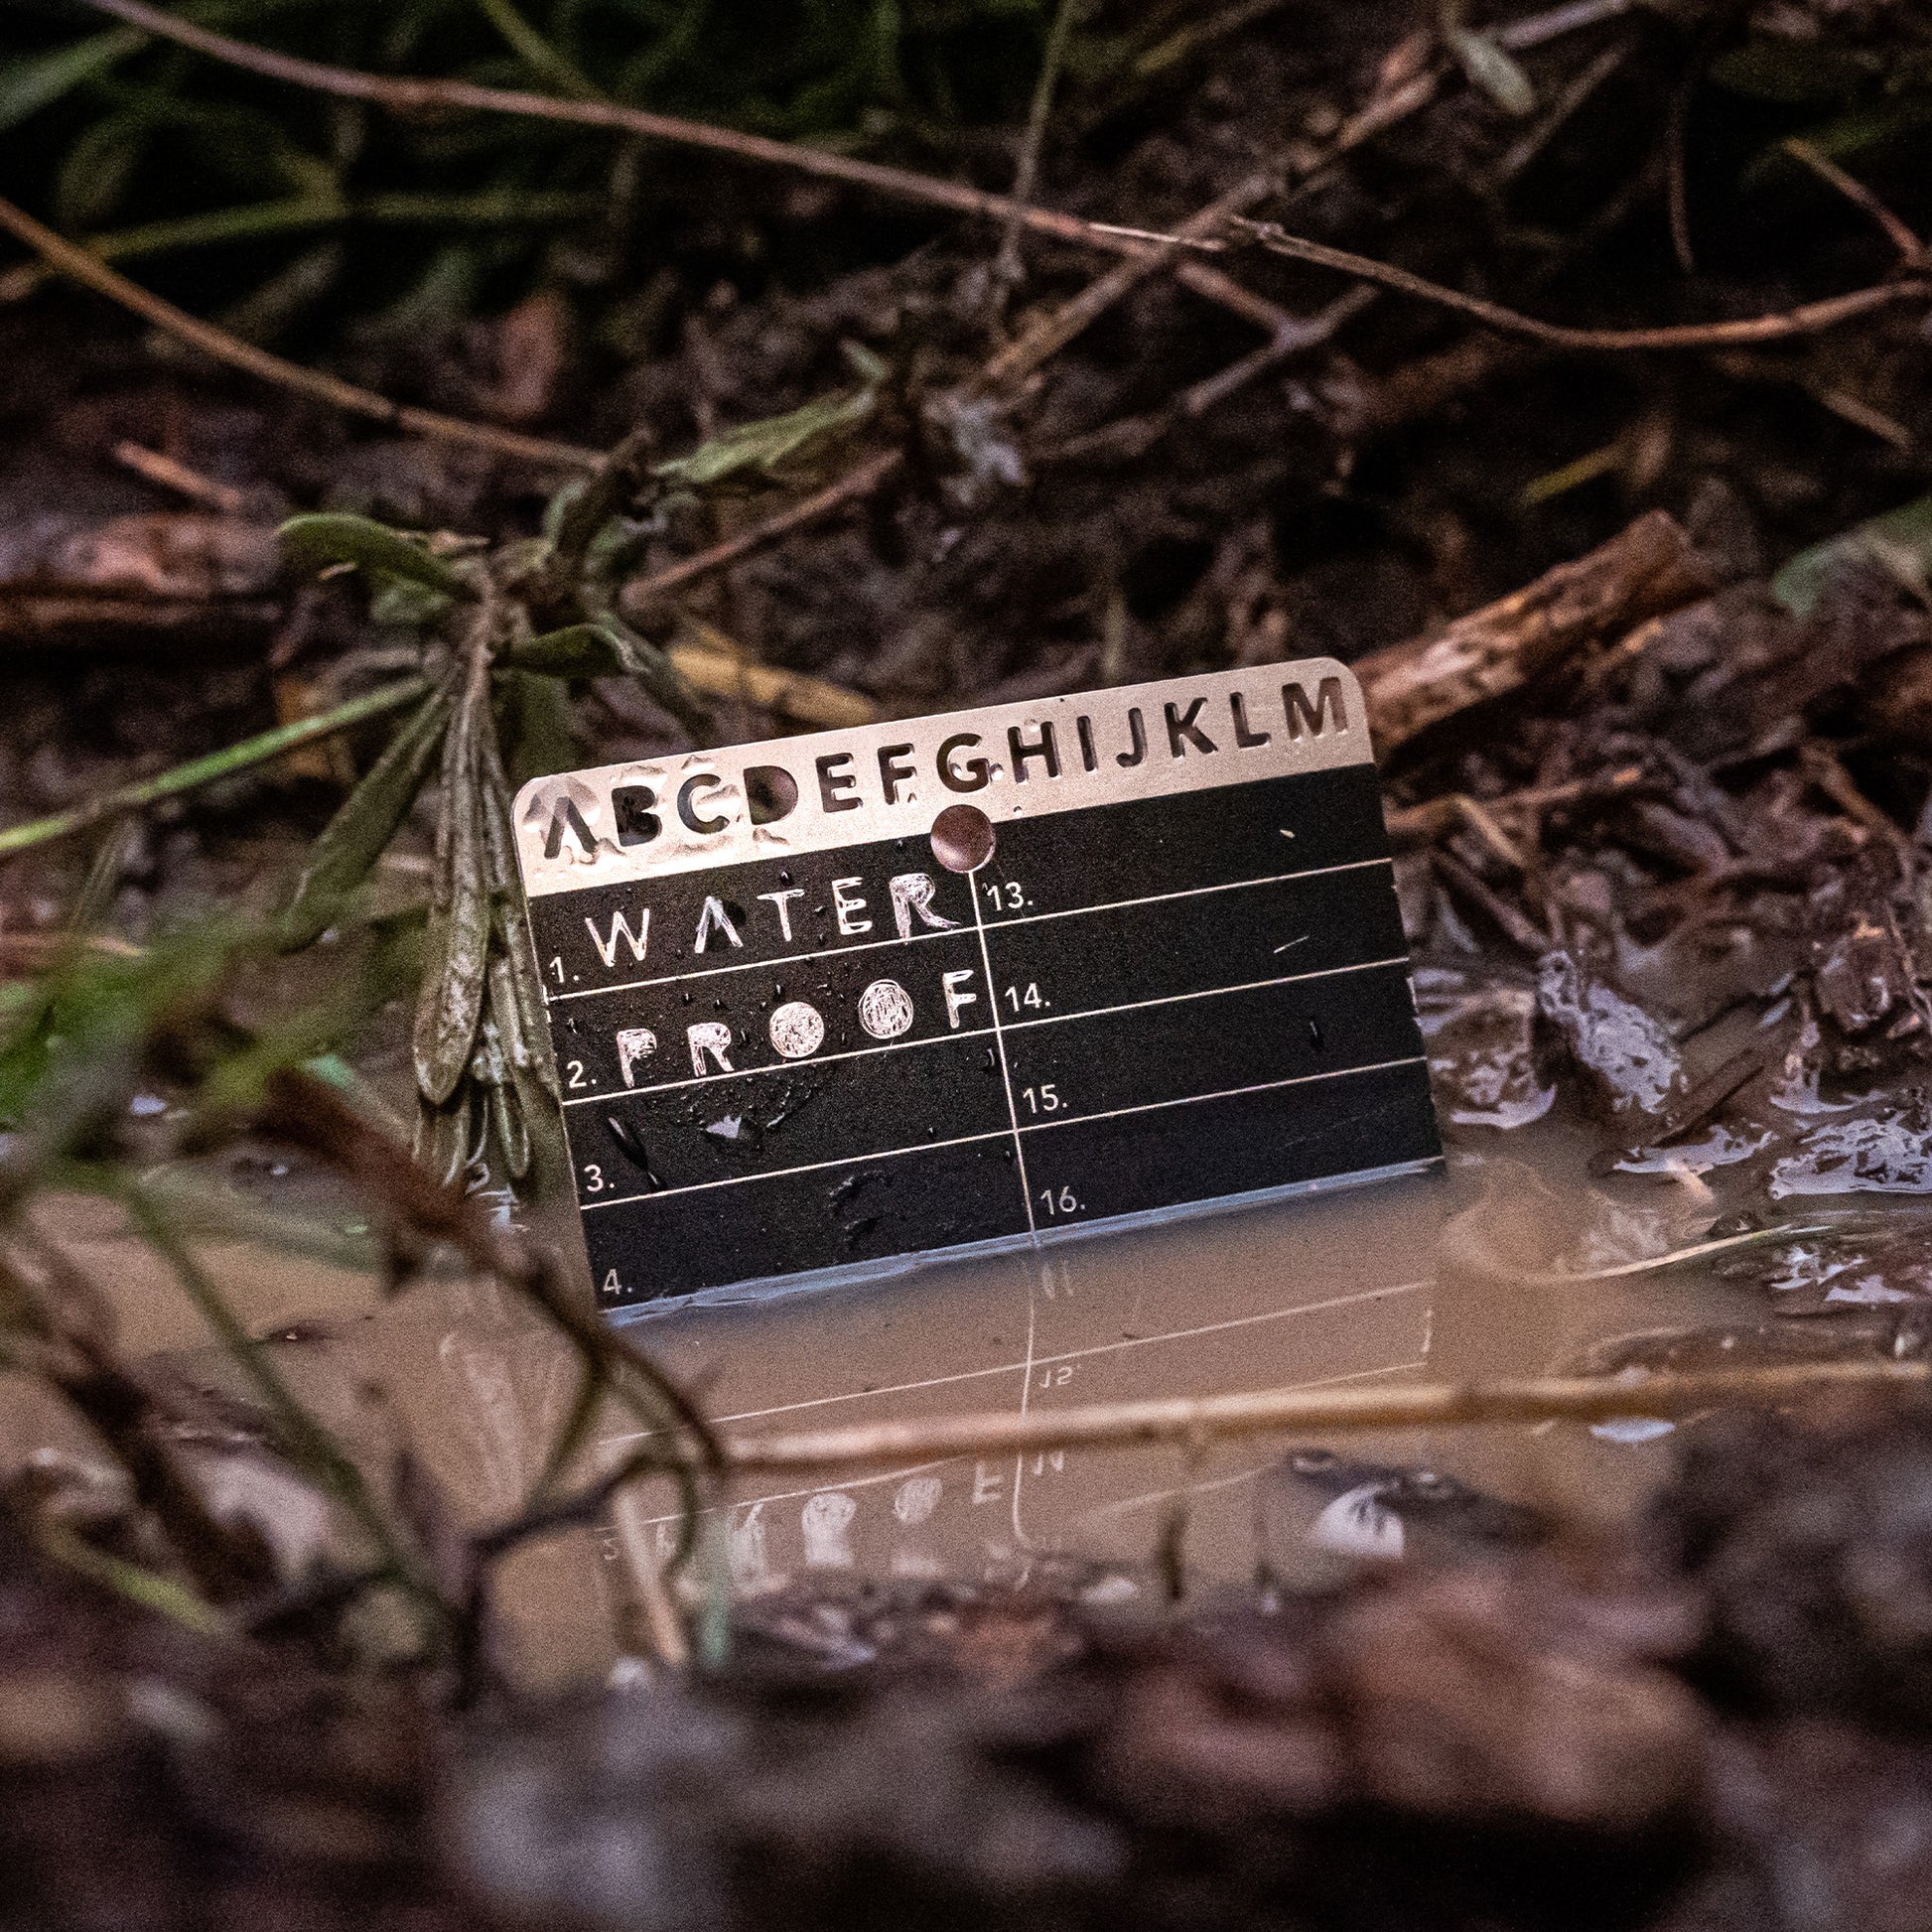 Crypto Seed Bank in muddy water - Cold wallet crypto - side facing